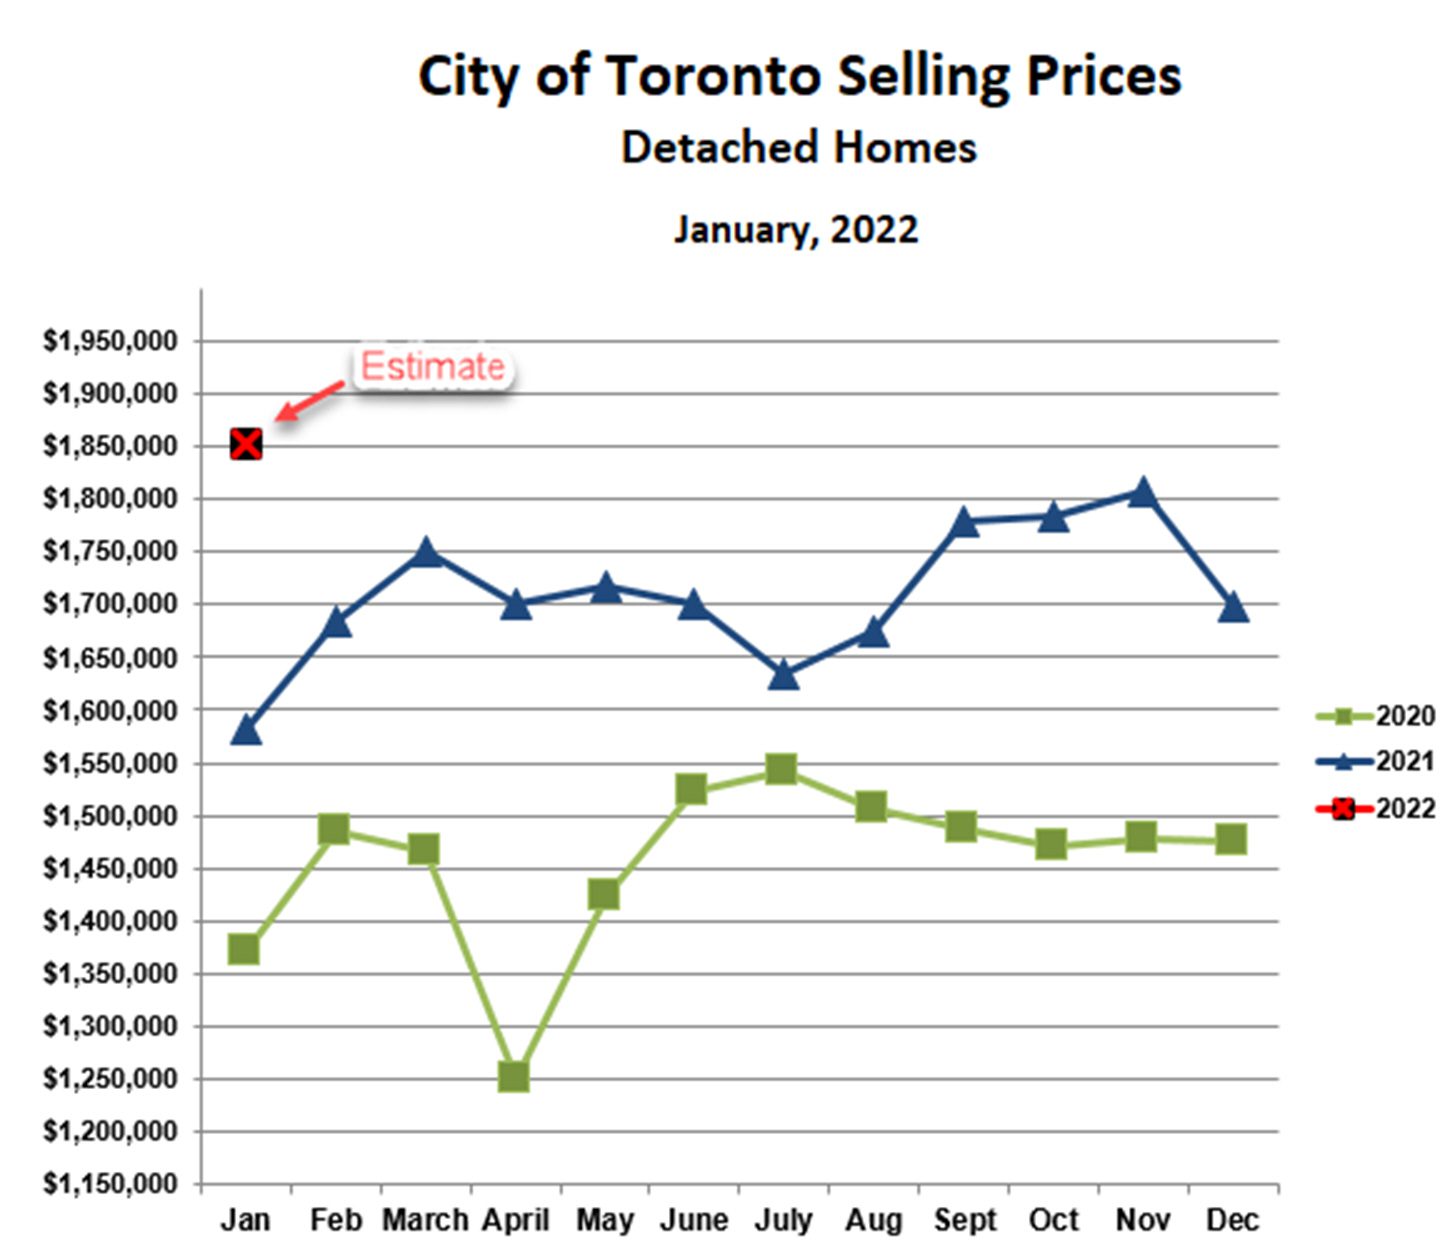 January 2022 Detached Prices